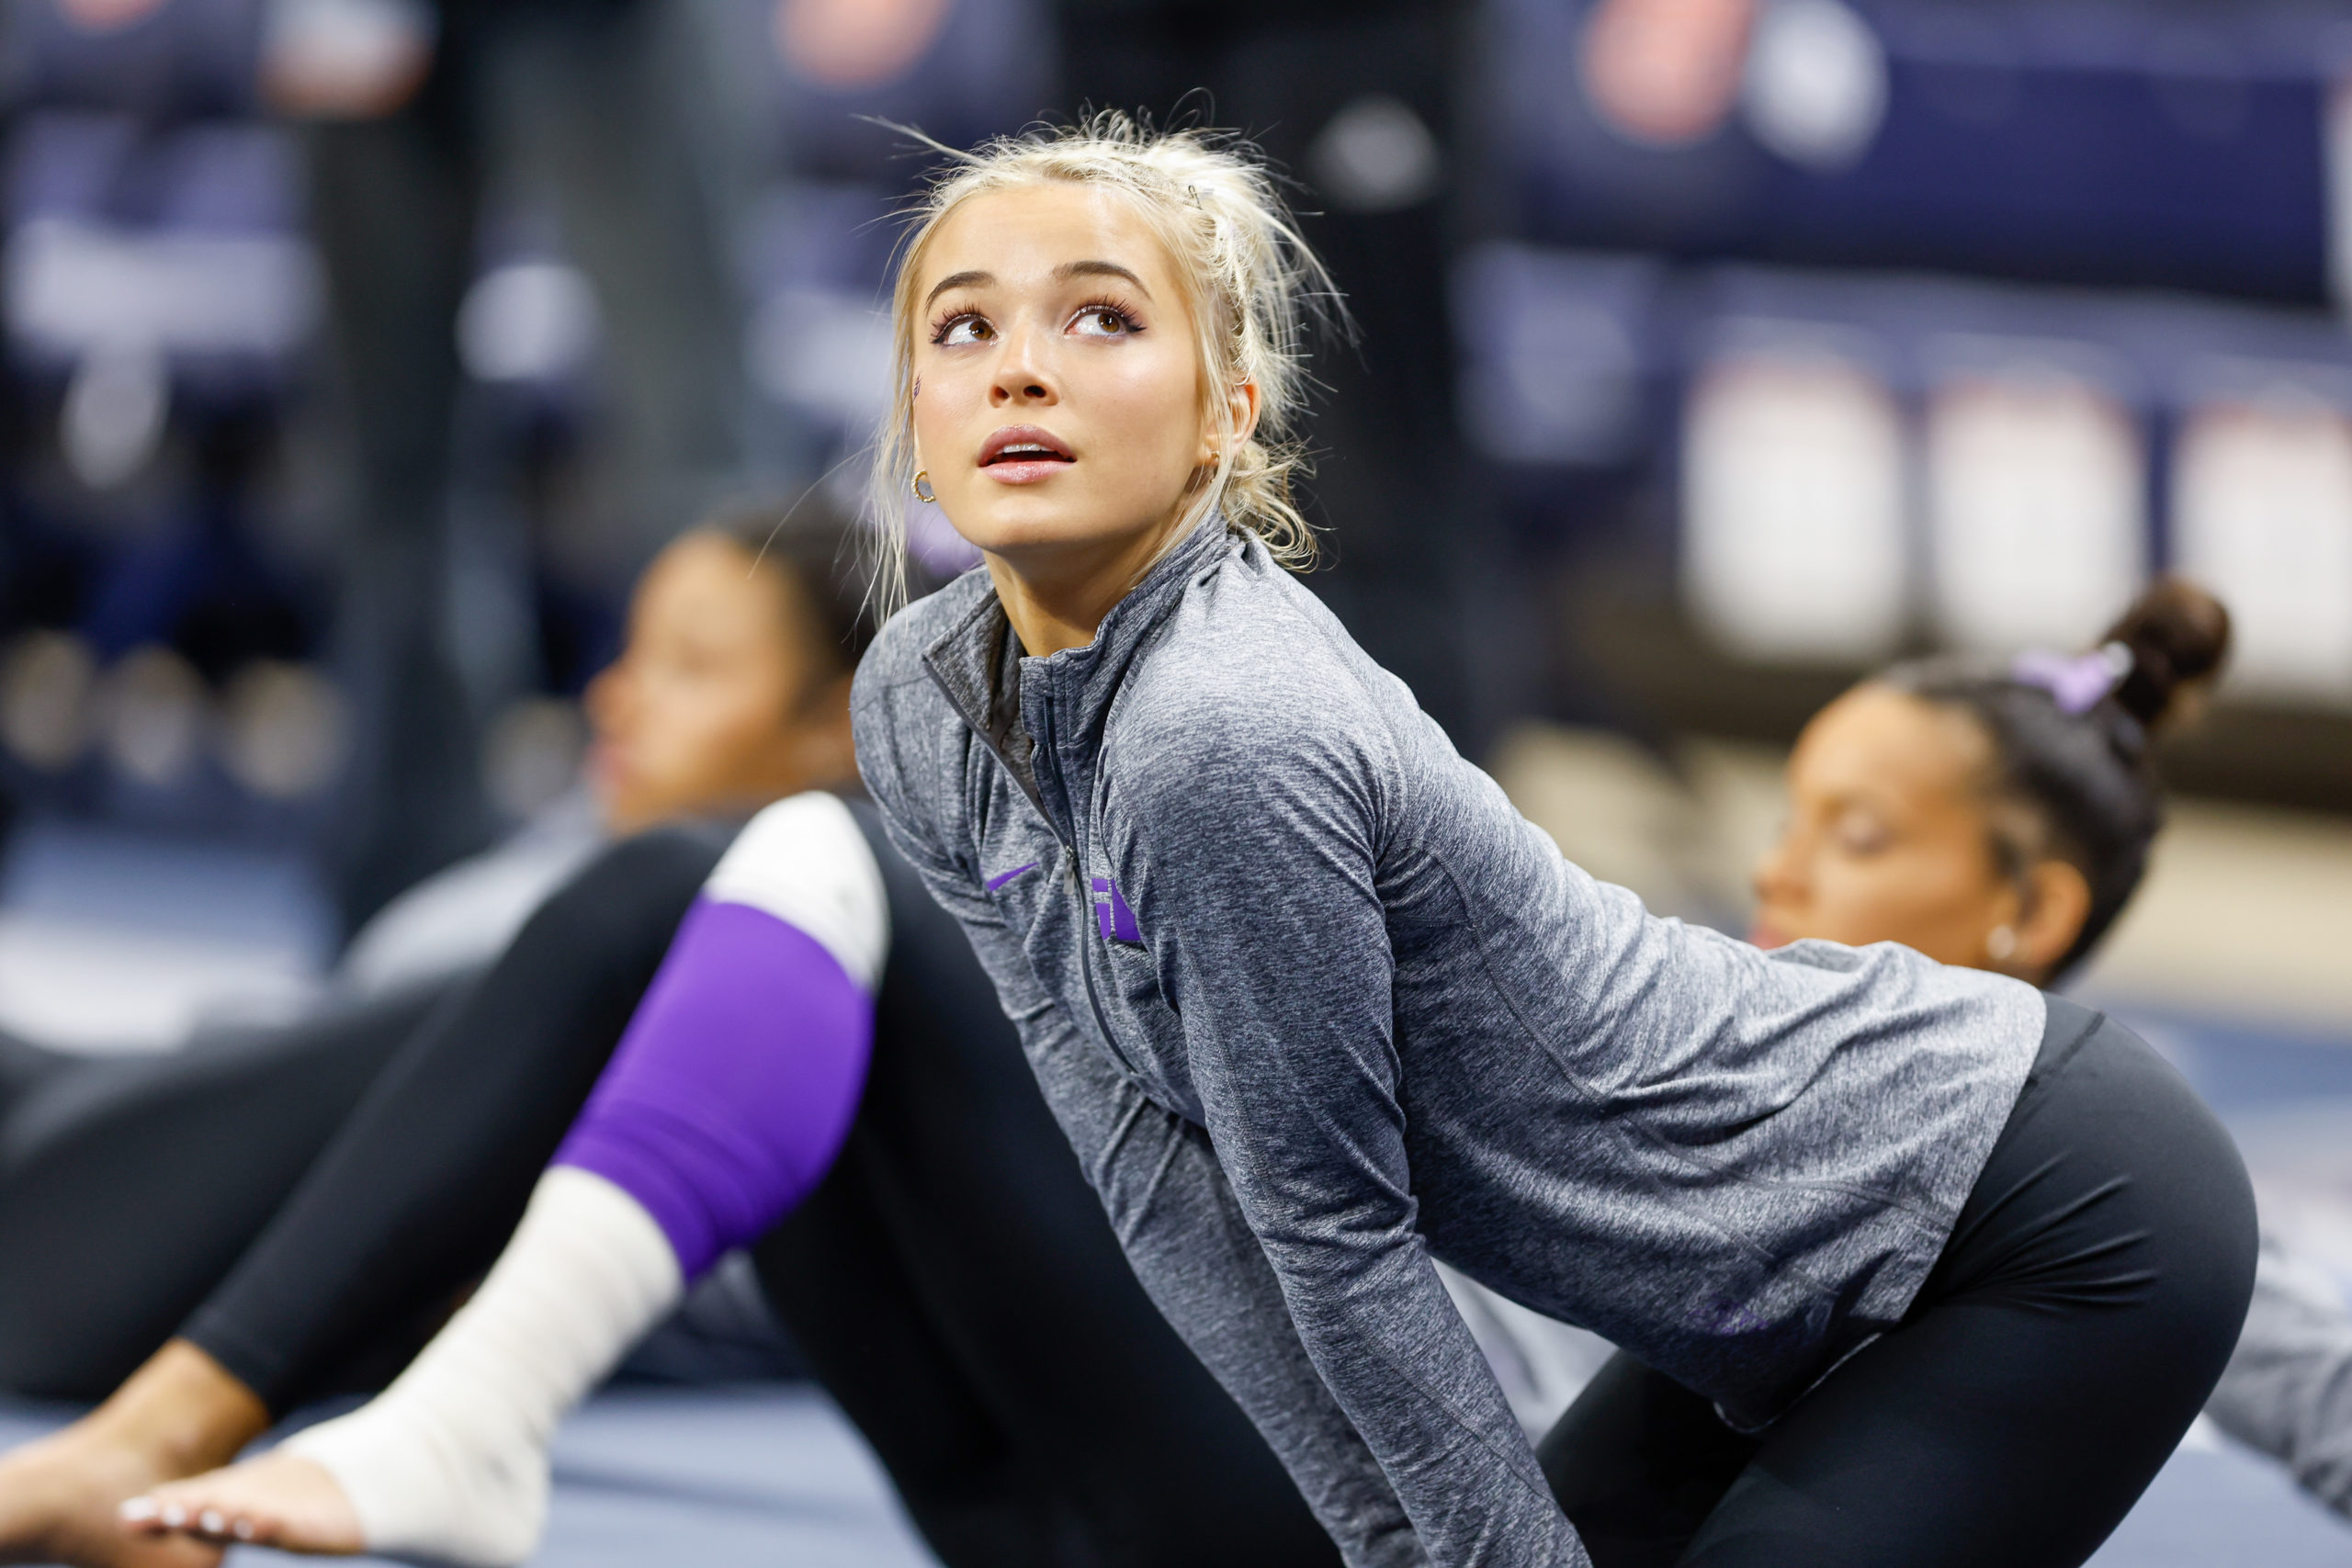 AUBURN, AL - FEBRUARY 10: Olivia Dunne of LSU stretches before a meet against Auburn at Neville Arena on February 10, 2023 in Auburn, Alabama. Stew Milne/Getty Images